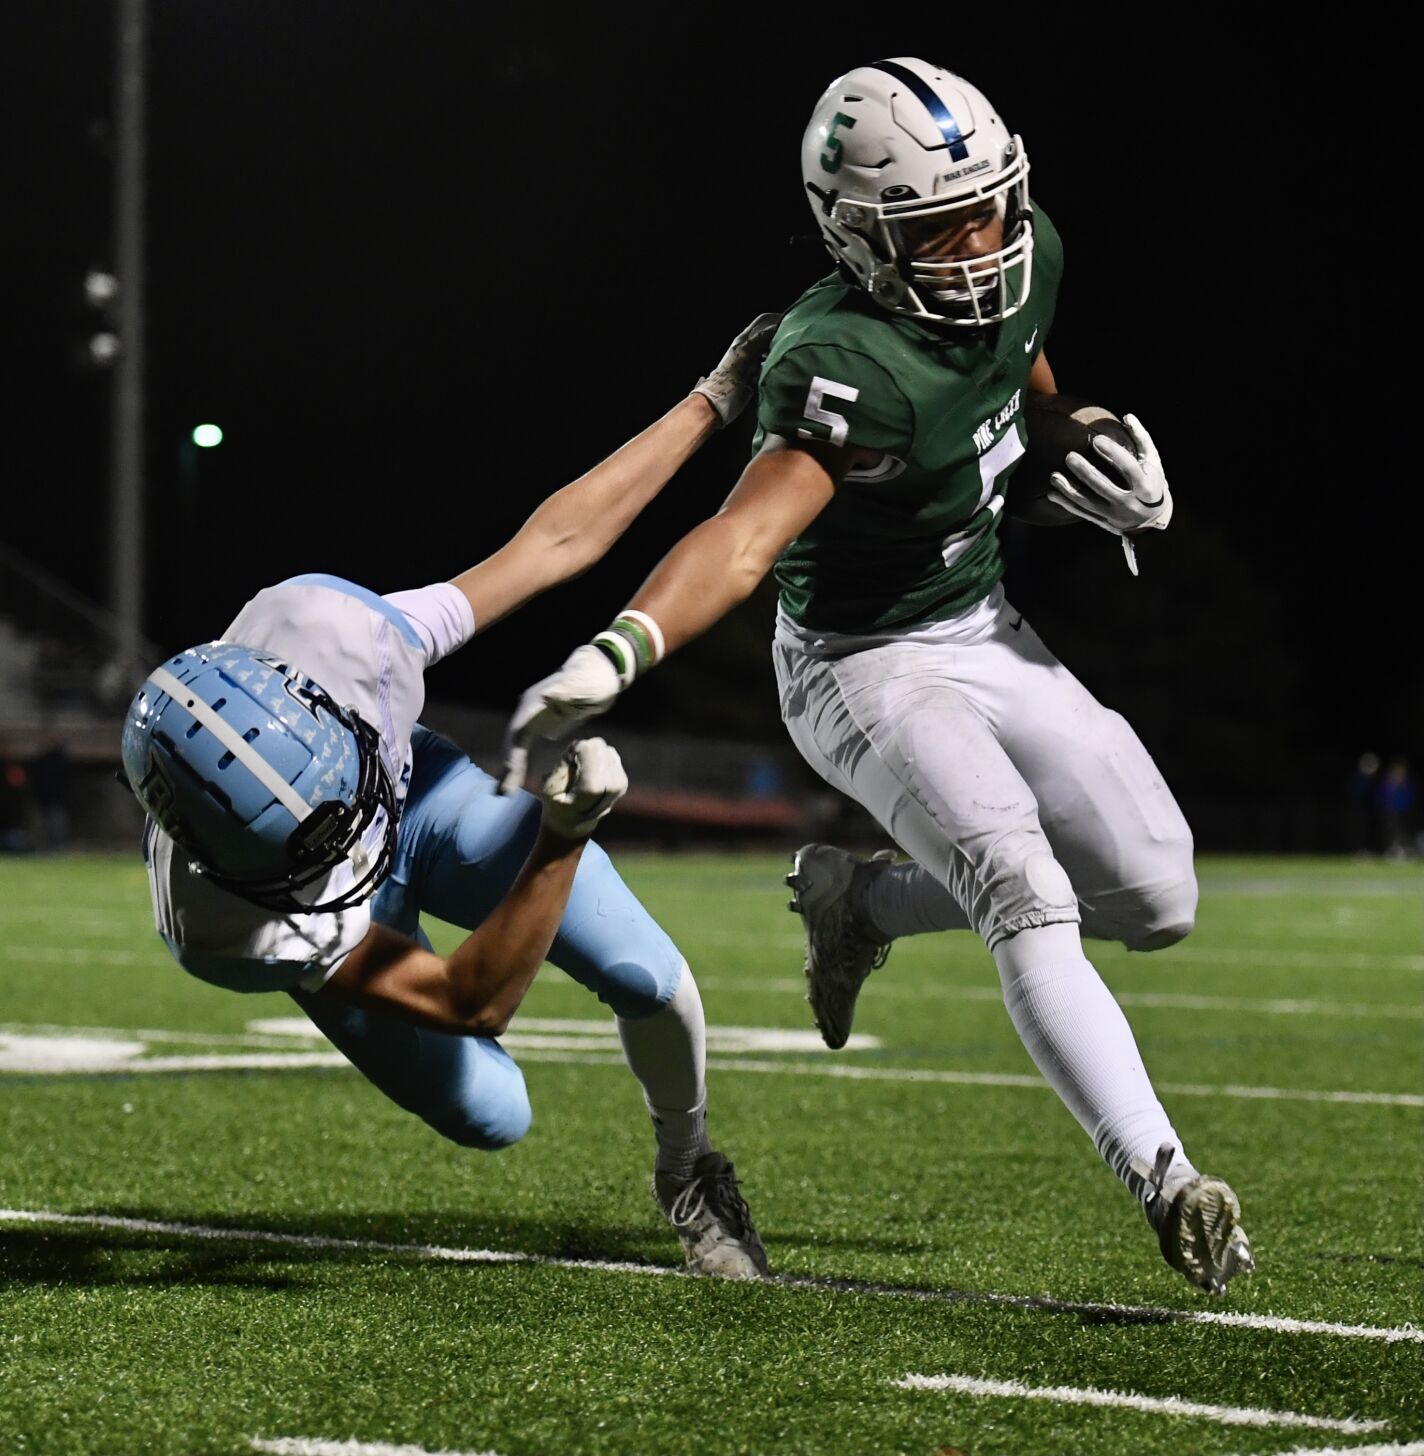 Ralston Valley triumphs over Pine Creek in 5A quarterfinals with 28-3 victory